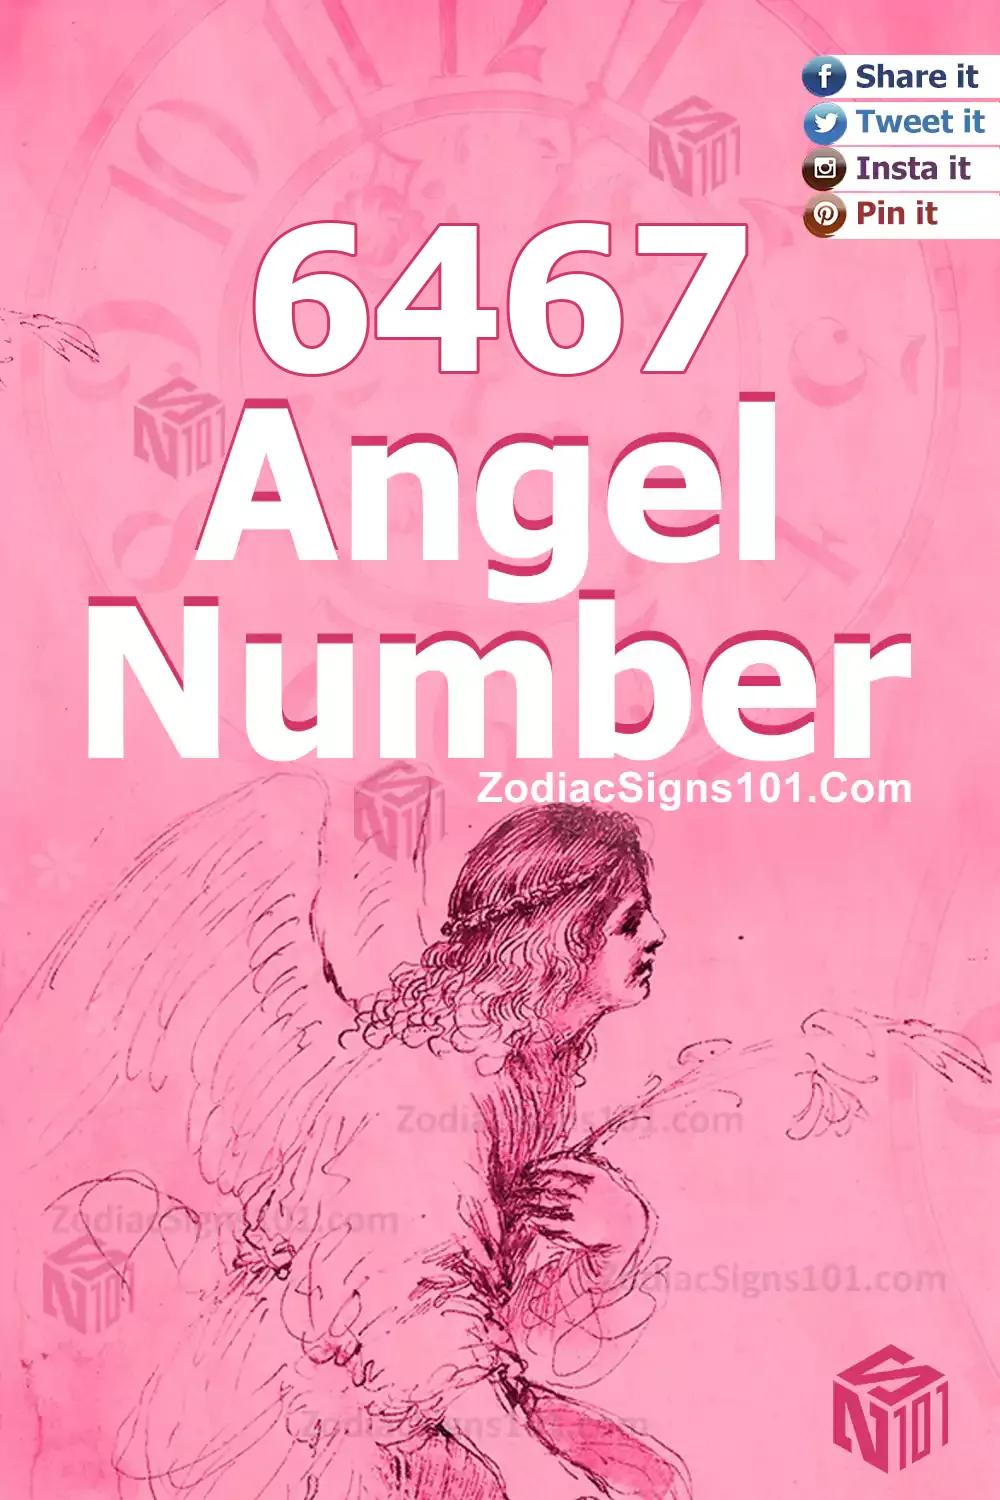 6467 Angel Number Meaning